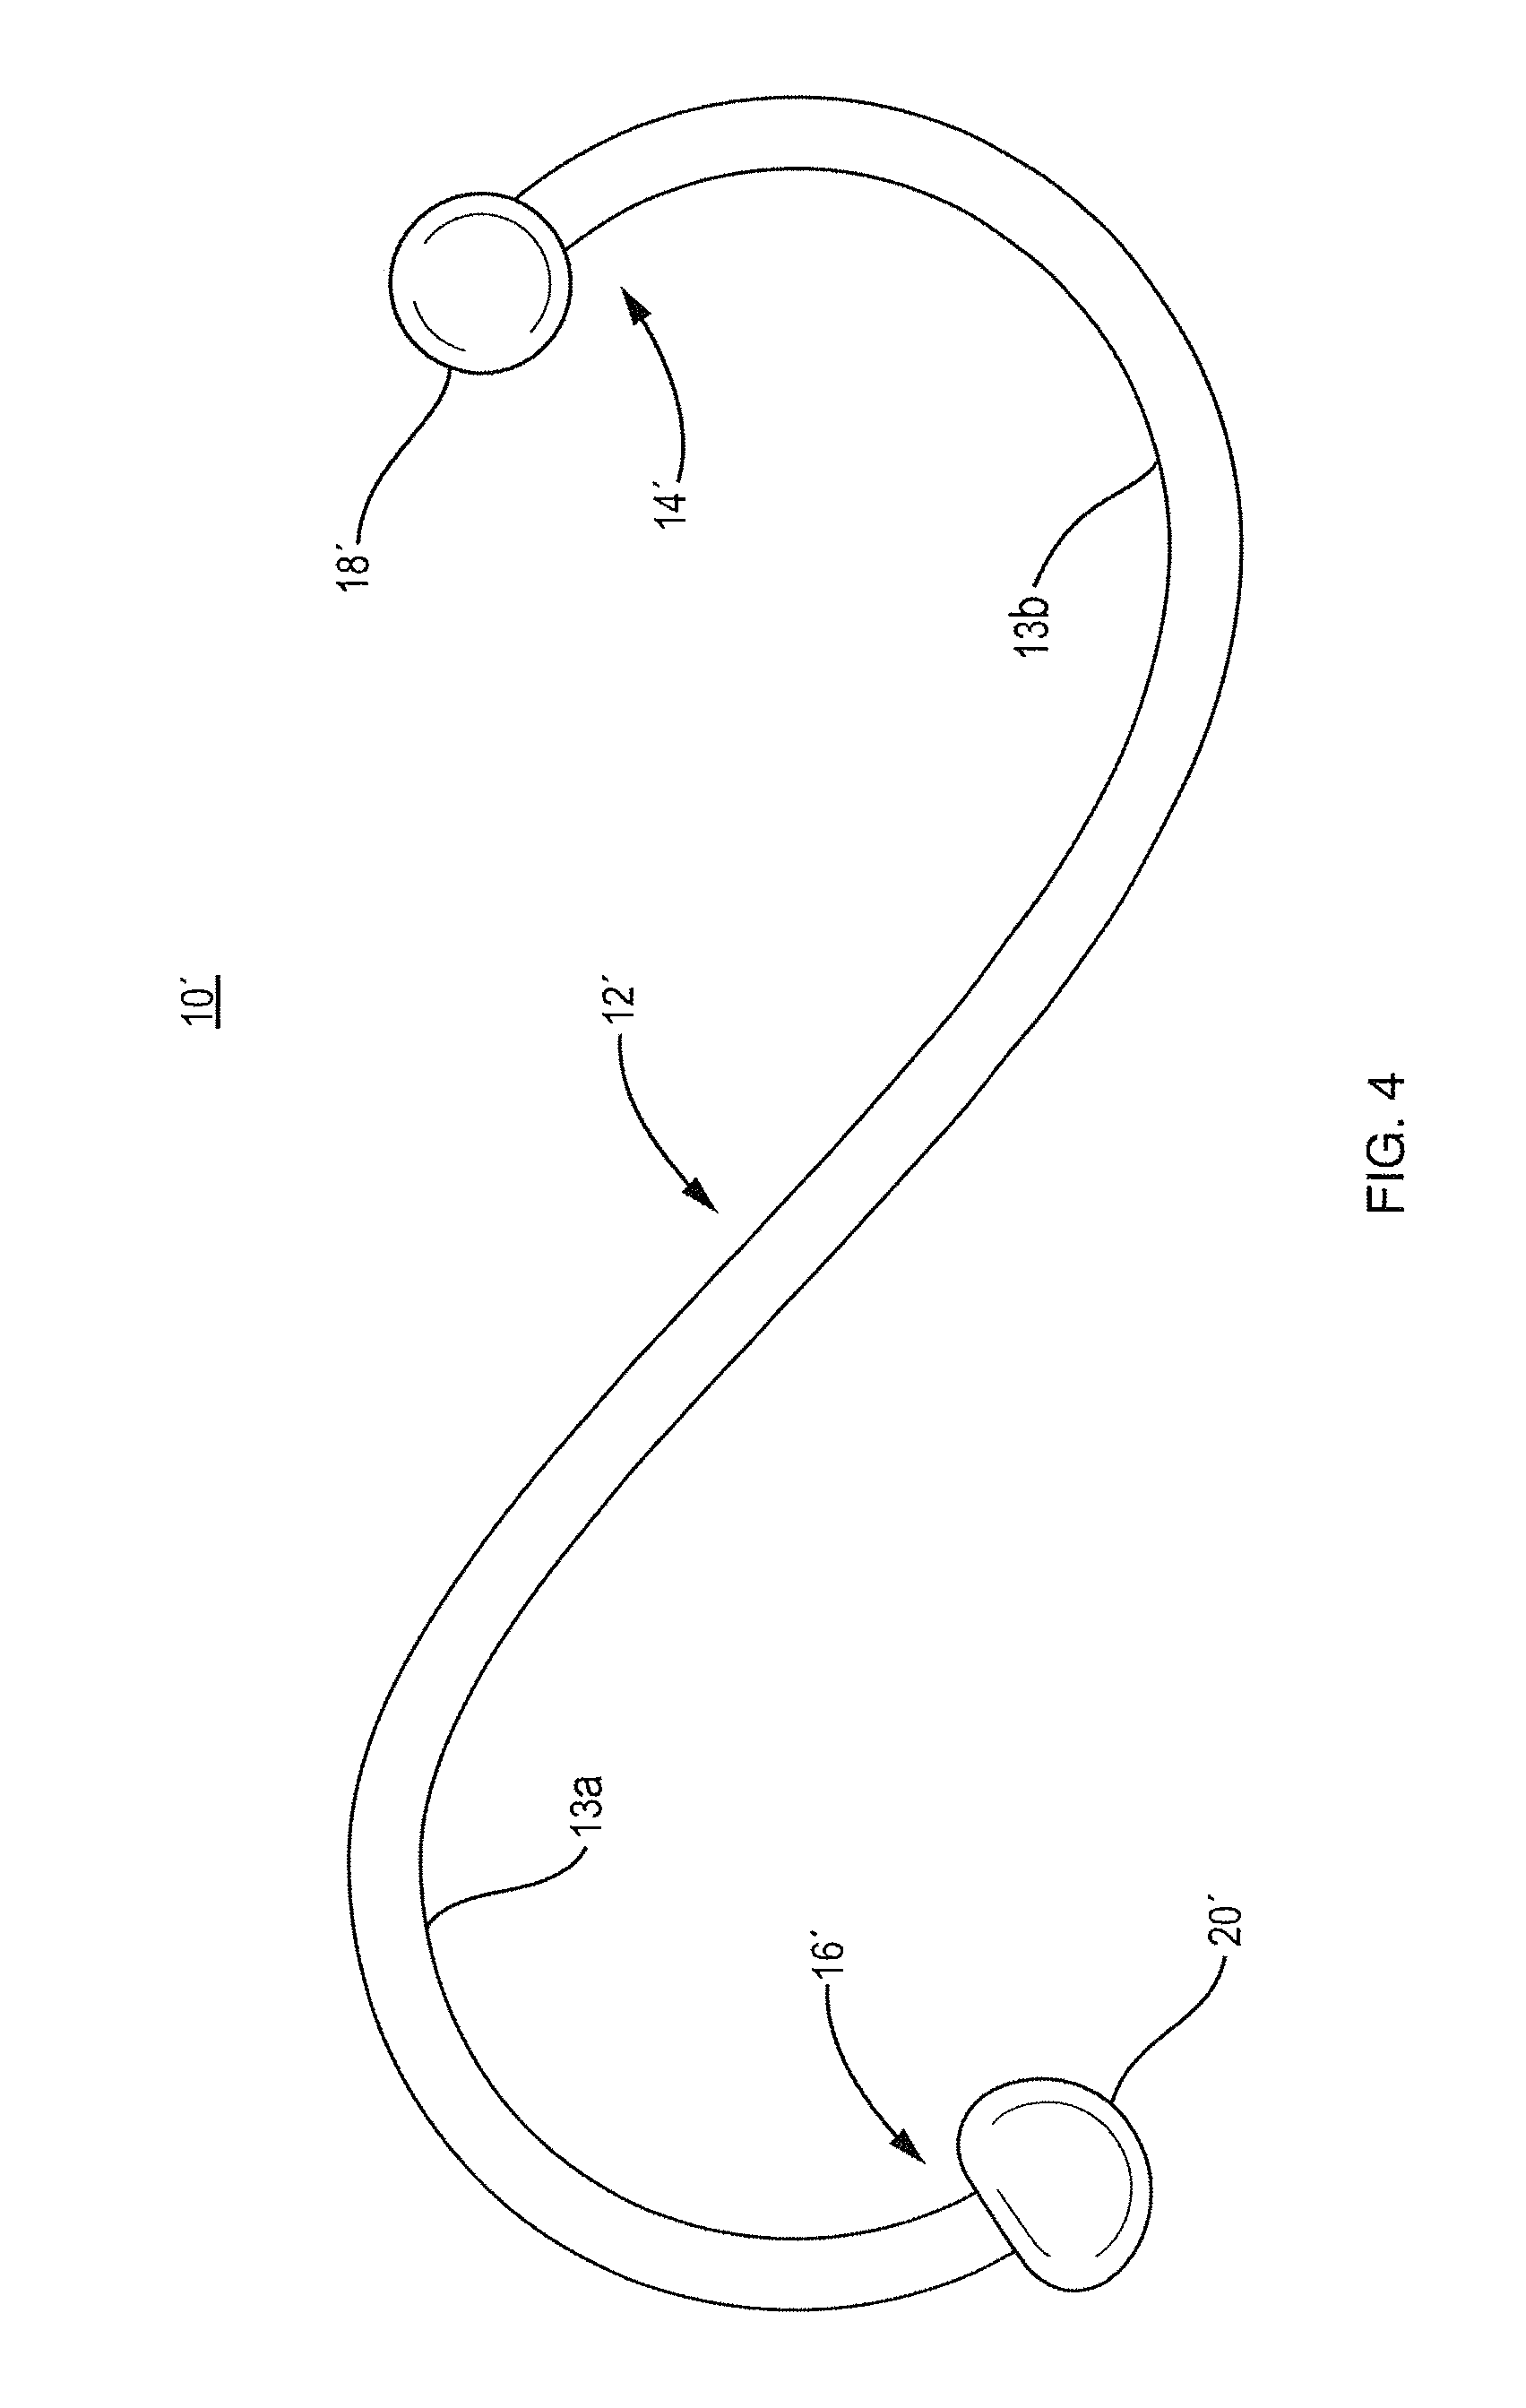 Apparatus and method for treating myofascial trigger points